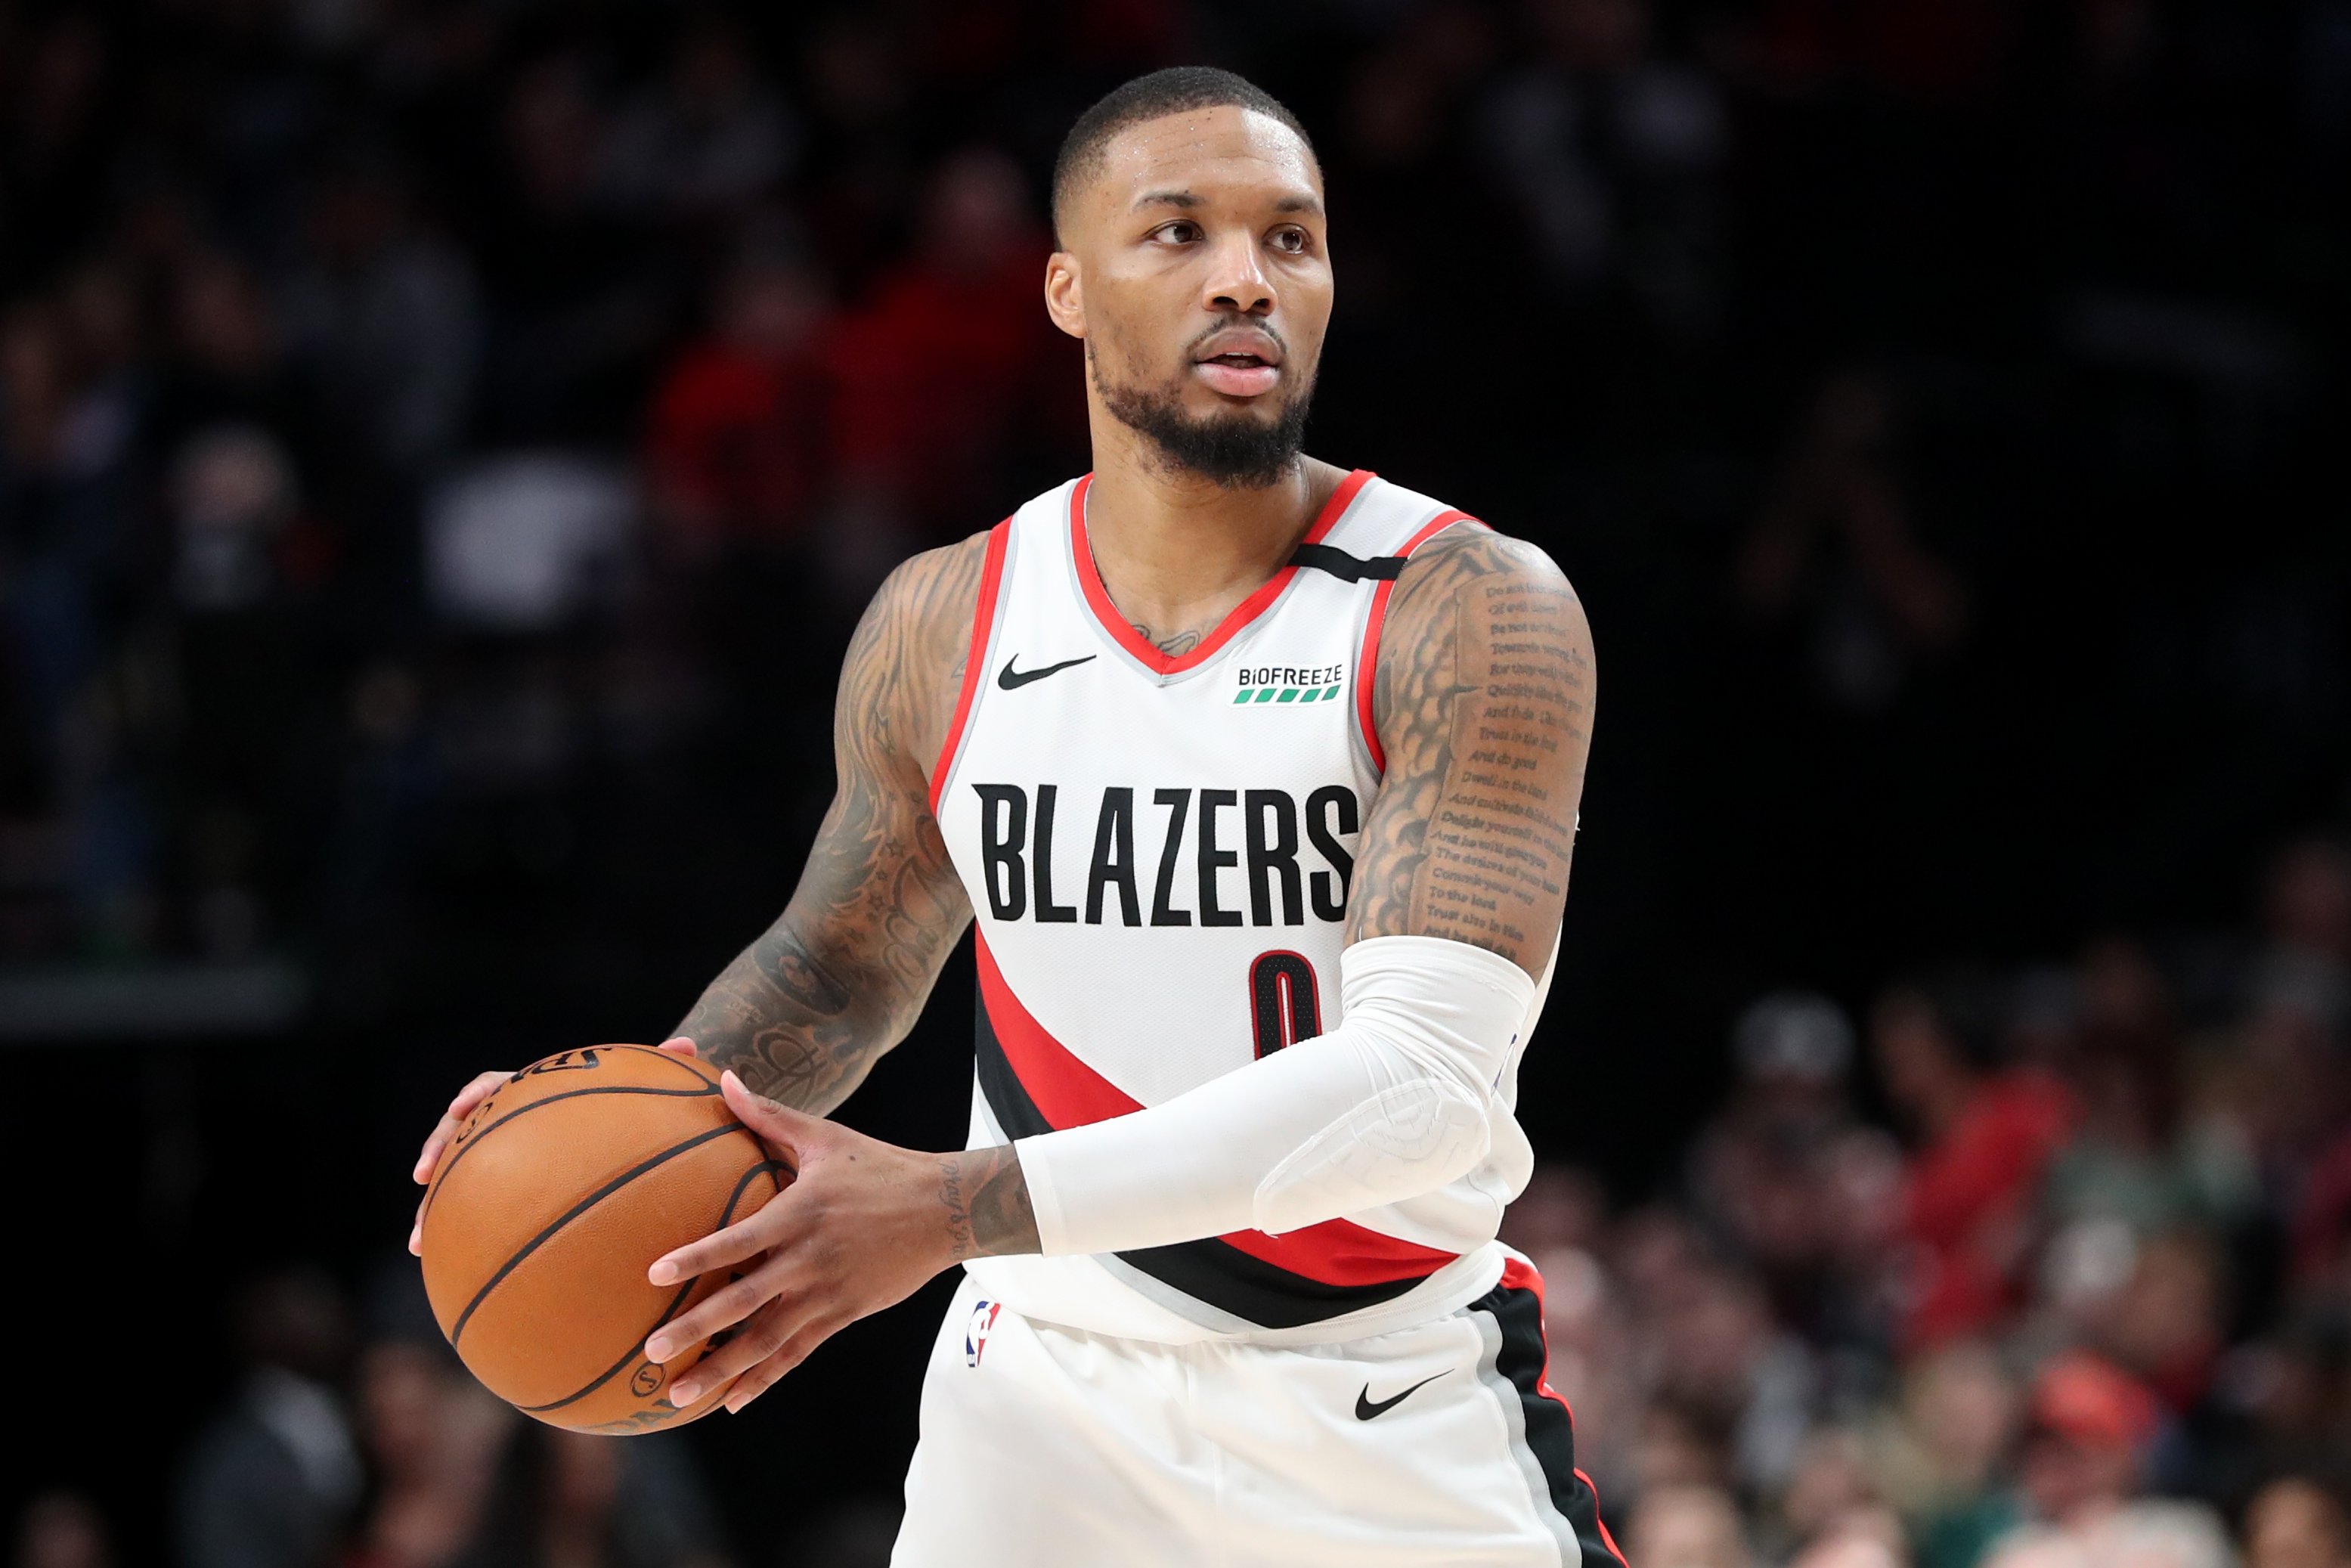 Damian Lillard #0 of the Portland Trail Blazers during a game against the San Antonio Spurs at Moda Center on February 06, 2020 in Portland, Oregon | Photo: GettyImages